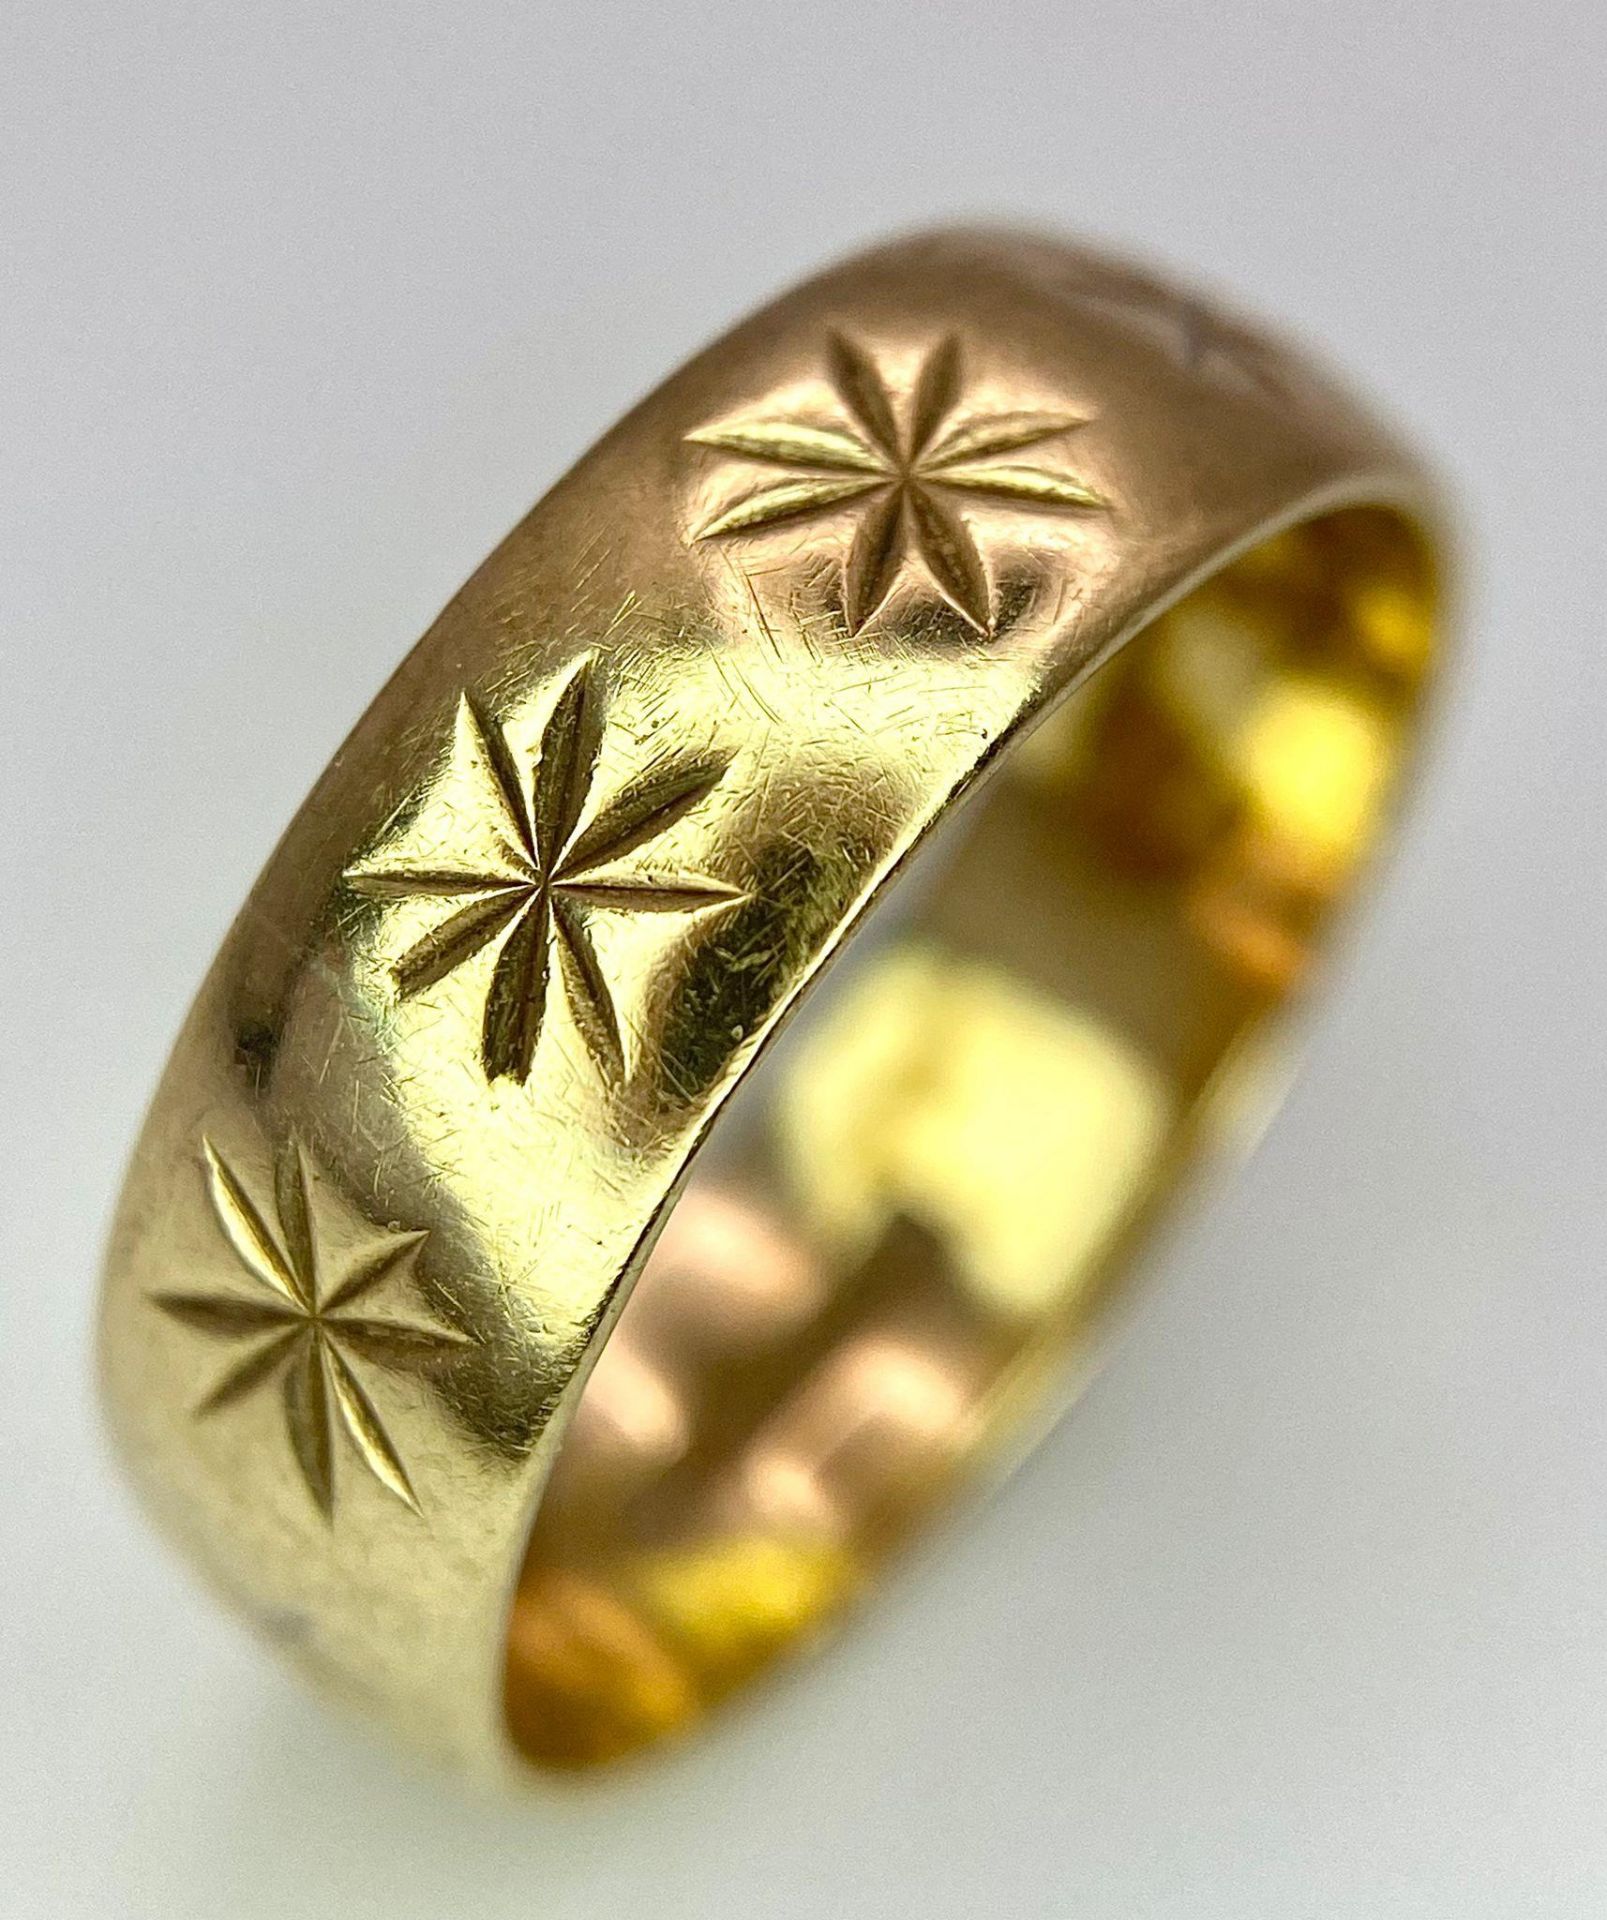 A Vintage 9K Yellow Gold Band Ring with Star Decoration. 5mm width. Size M. 2.8g weight.